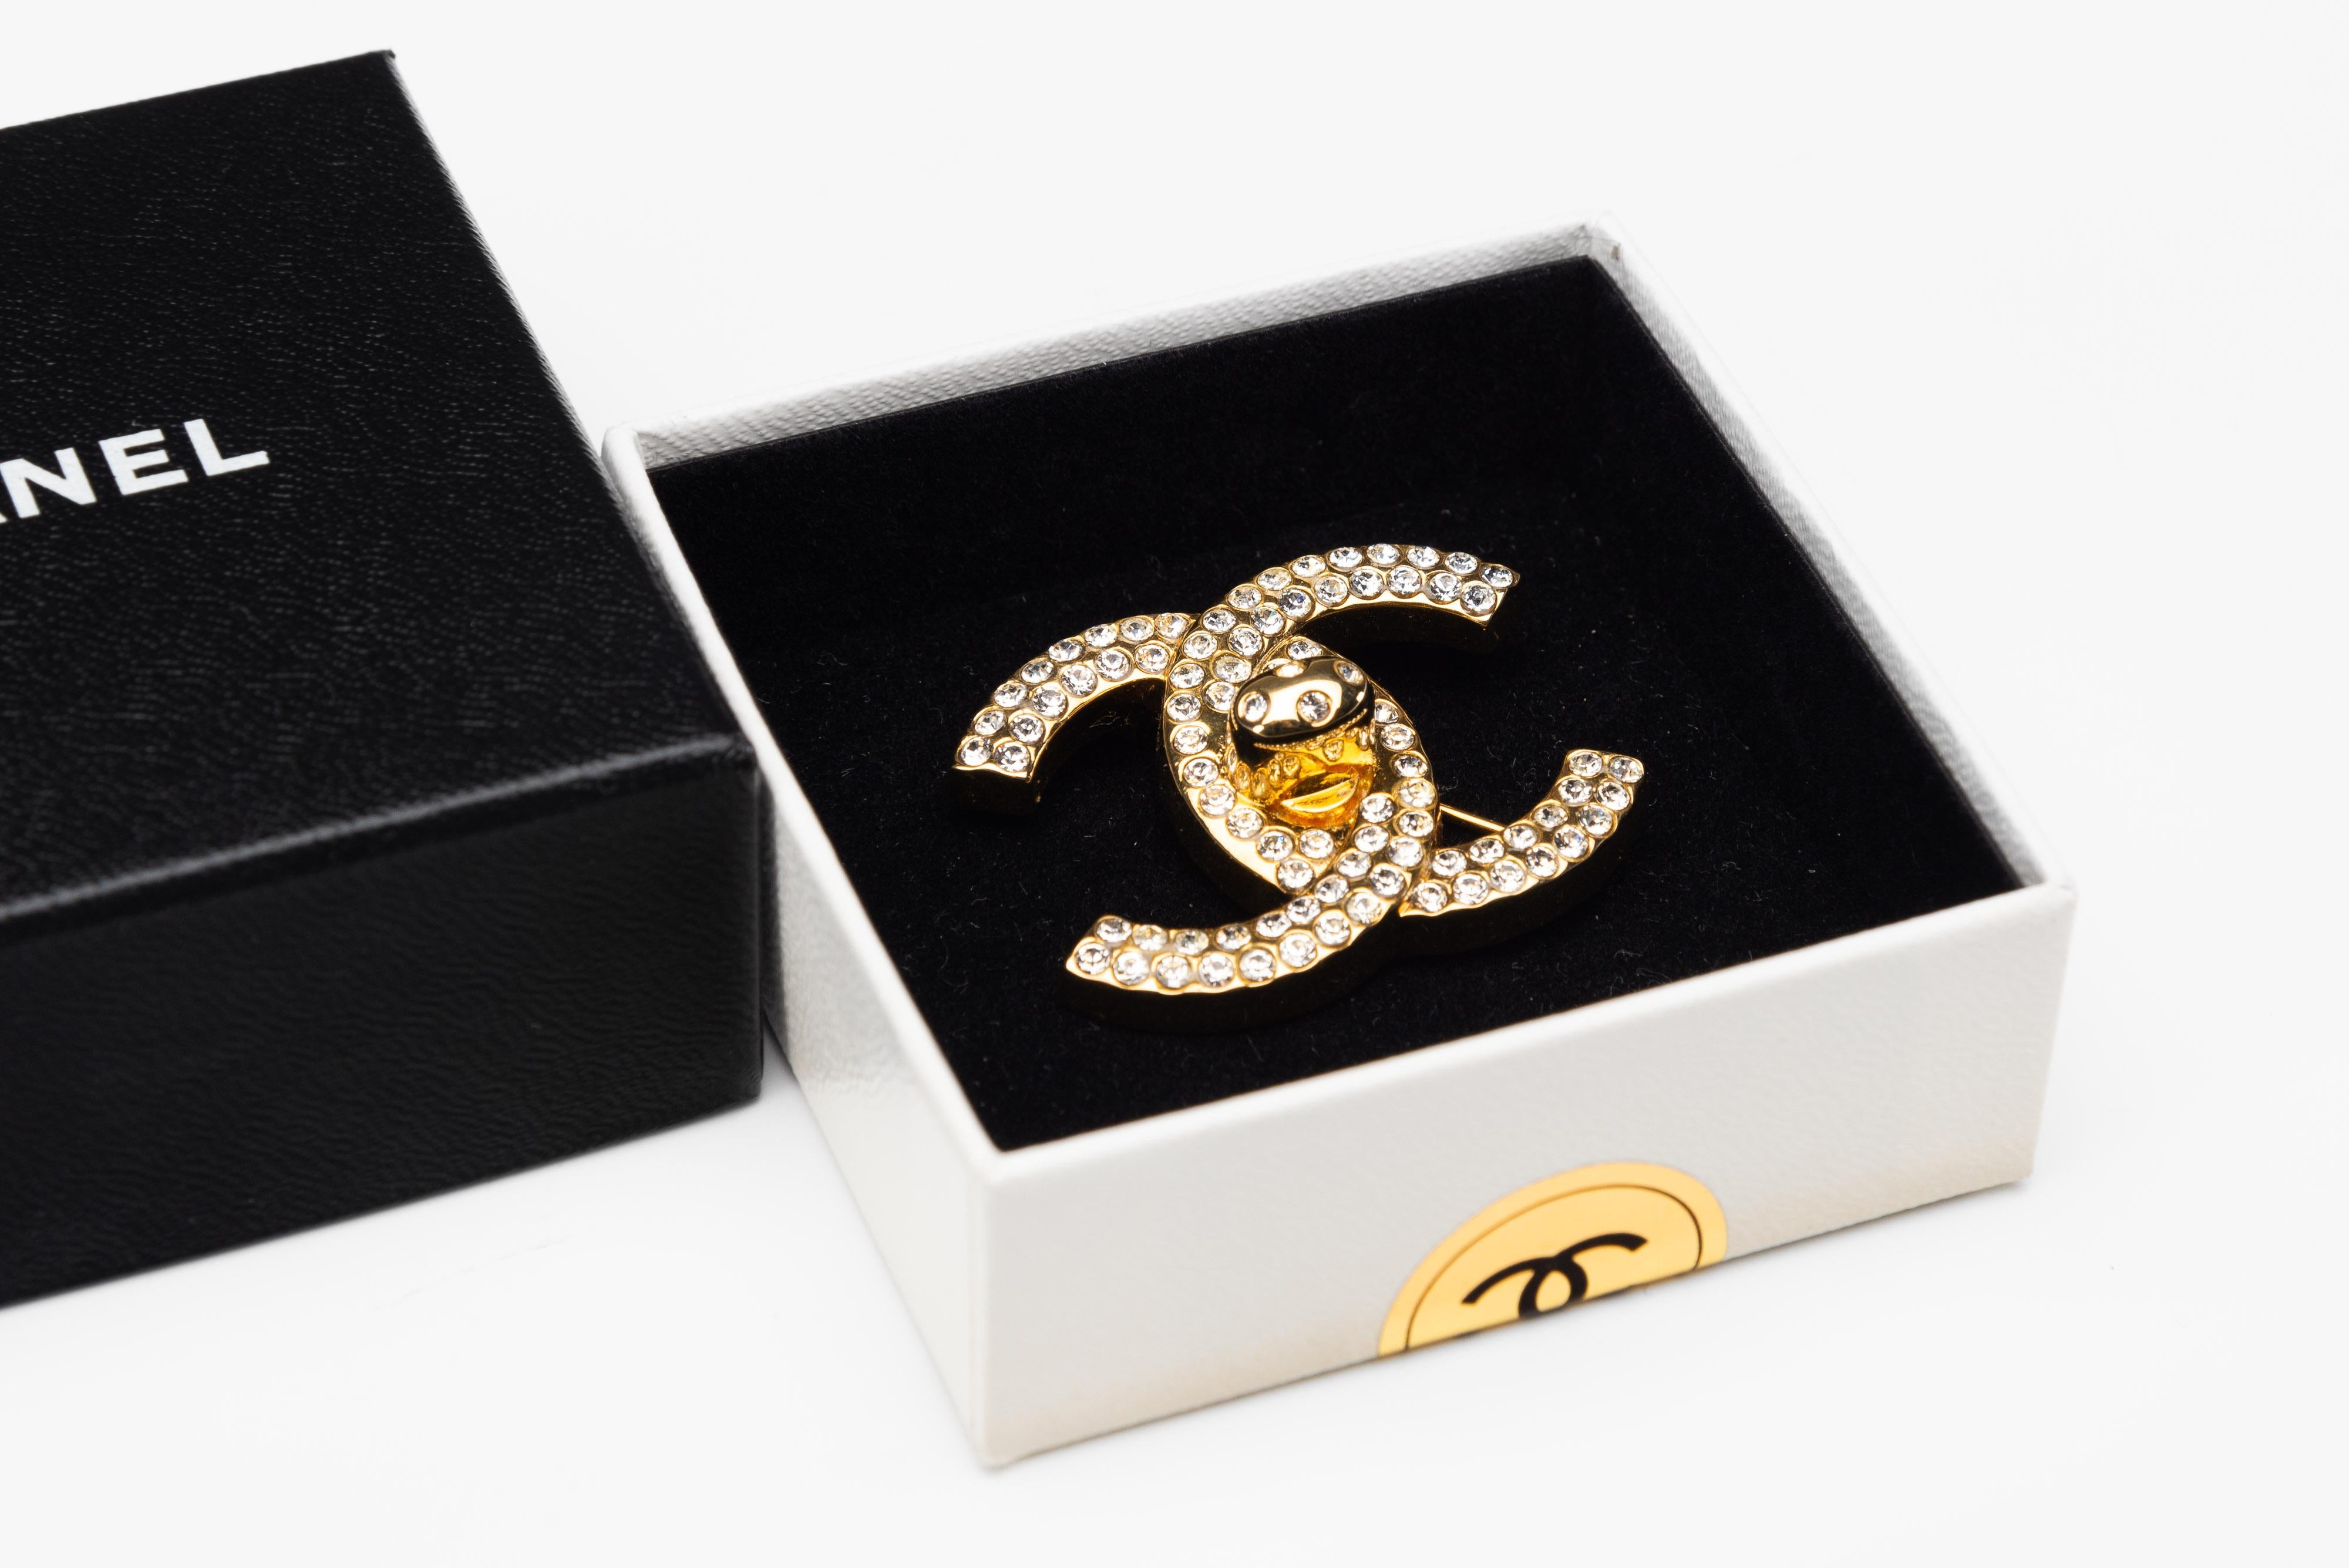 From the collection of SAVINETI we offer this rare Chanel CC Brooch:
-    Brand: Chanel
-    Model: CC Brooch
-    Year: 1996
-    Condition: Excellent (has almost never been used)
-    Materials: gold-plated

Authenticity is our core value at